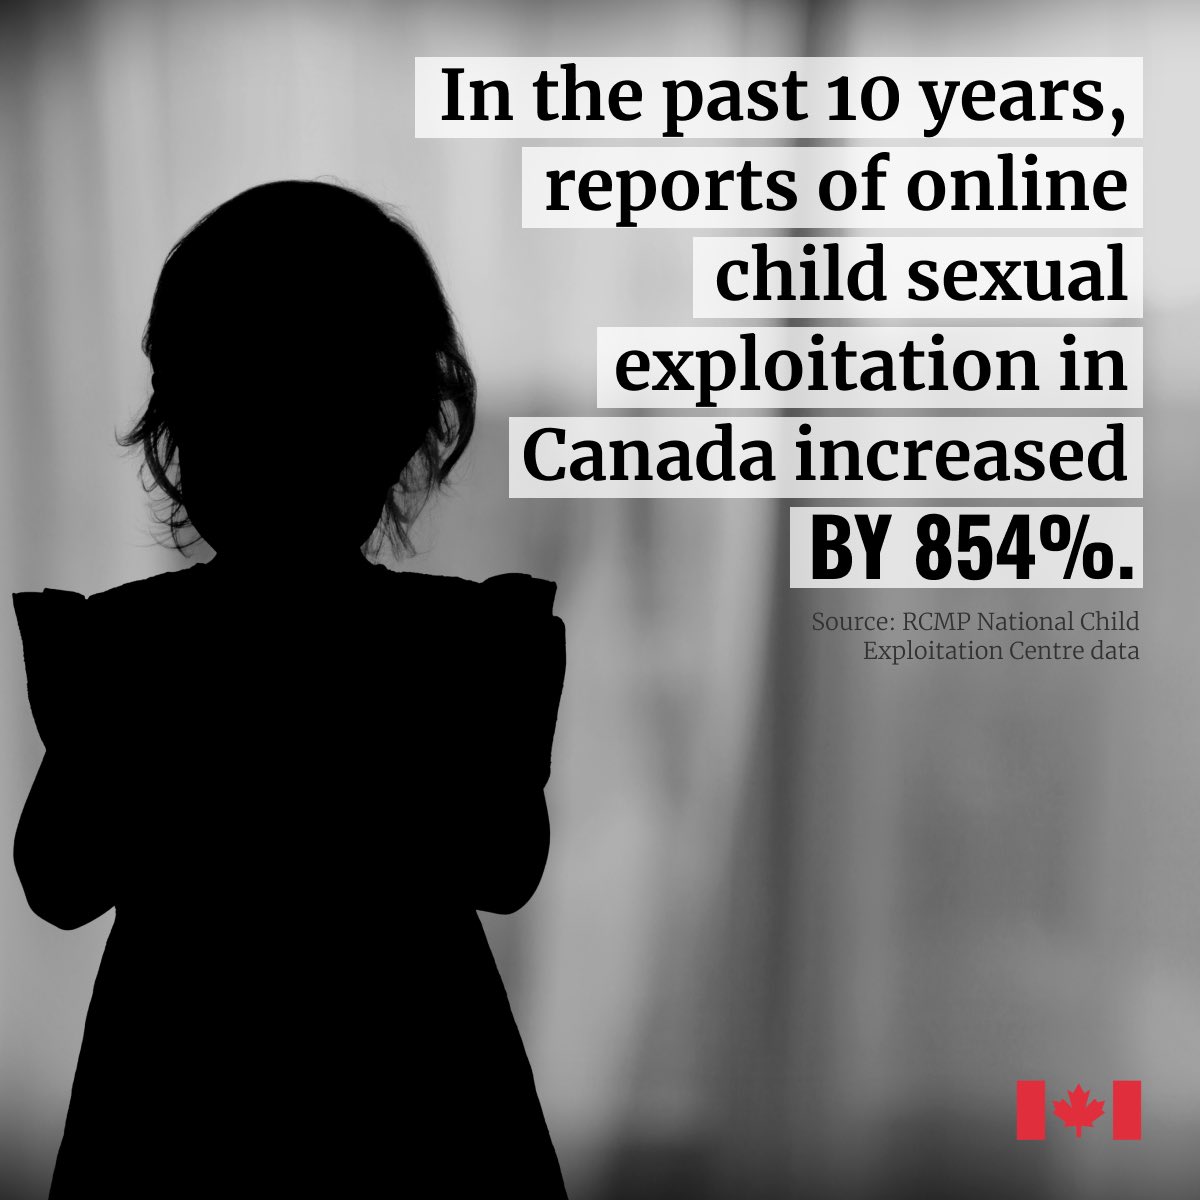 Online harms have real world consequences. We have a plan to stop child sexual exploitation online. 

This material is already illegal. Under the Online Harms Act, online platforms will need to remove child sexual exploitation content within 24 hours. #ProtectKidsOnline